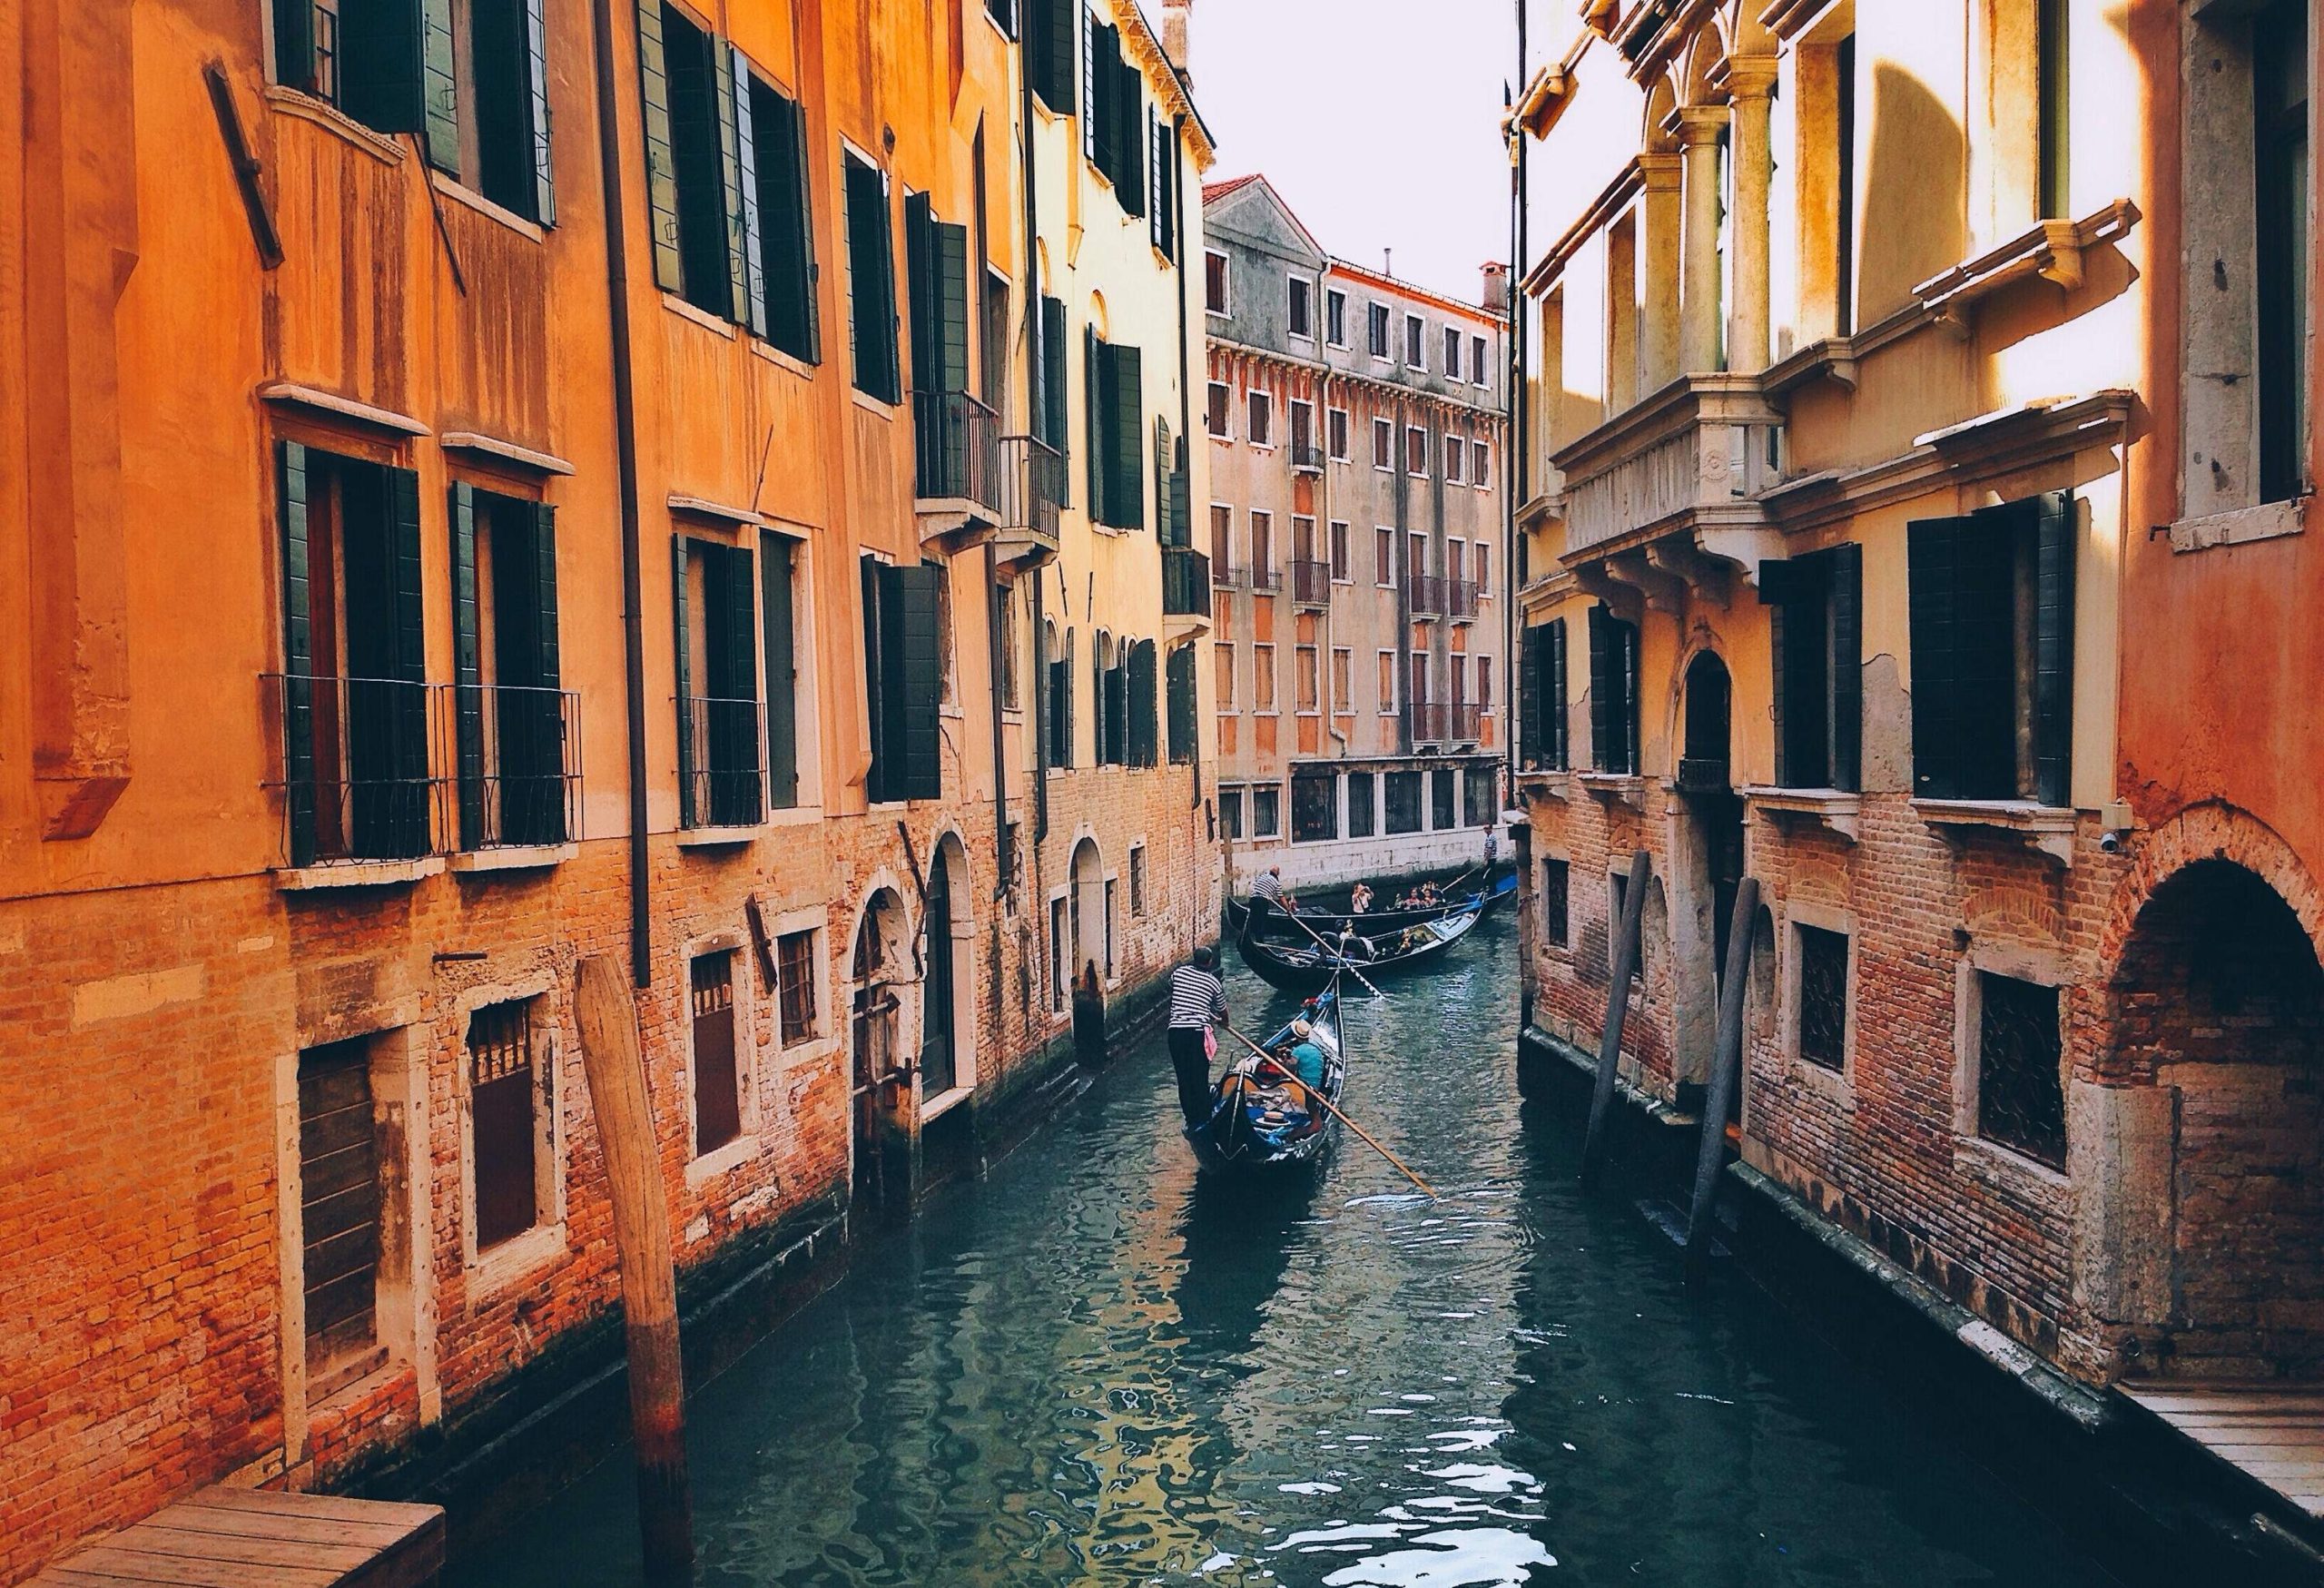 Boats gracefully glide along a serene canal, embraced by buildings on either side.